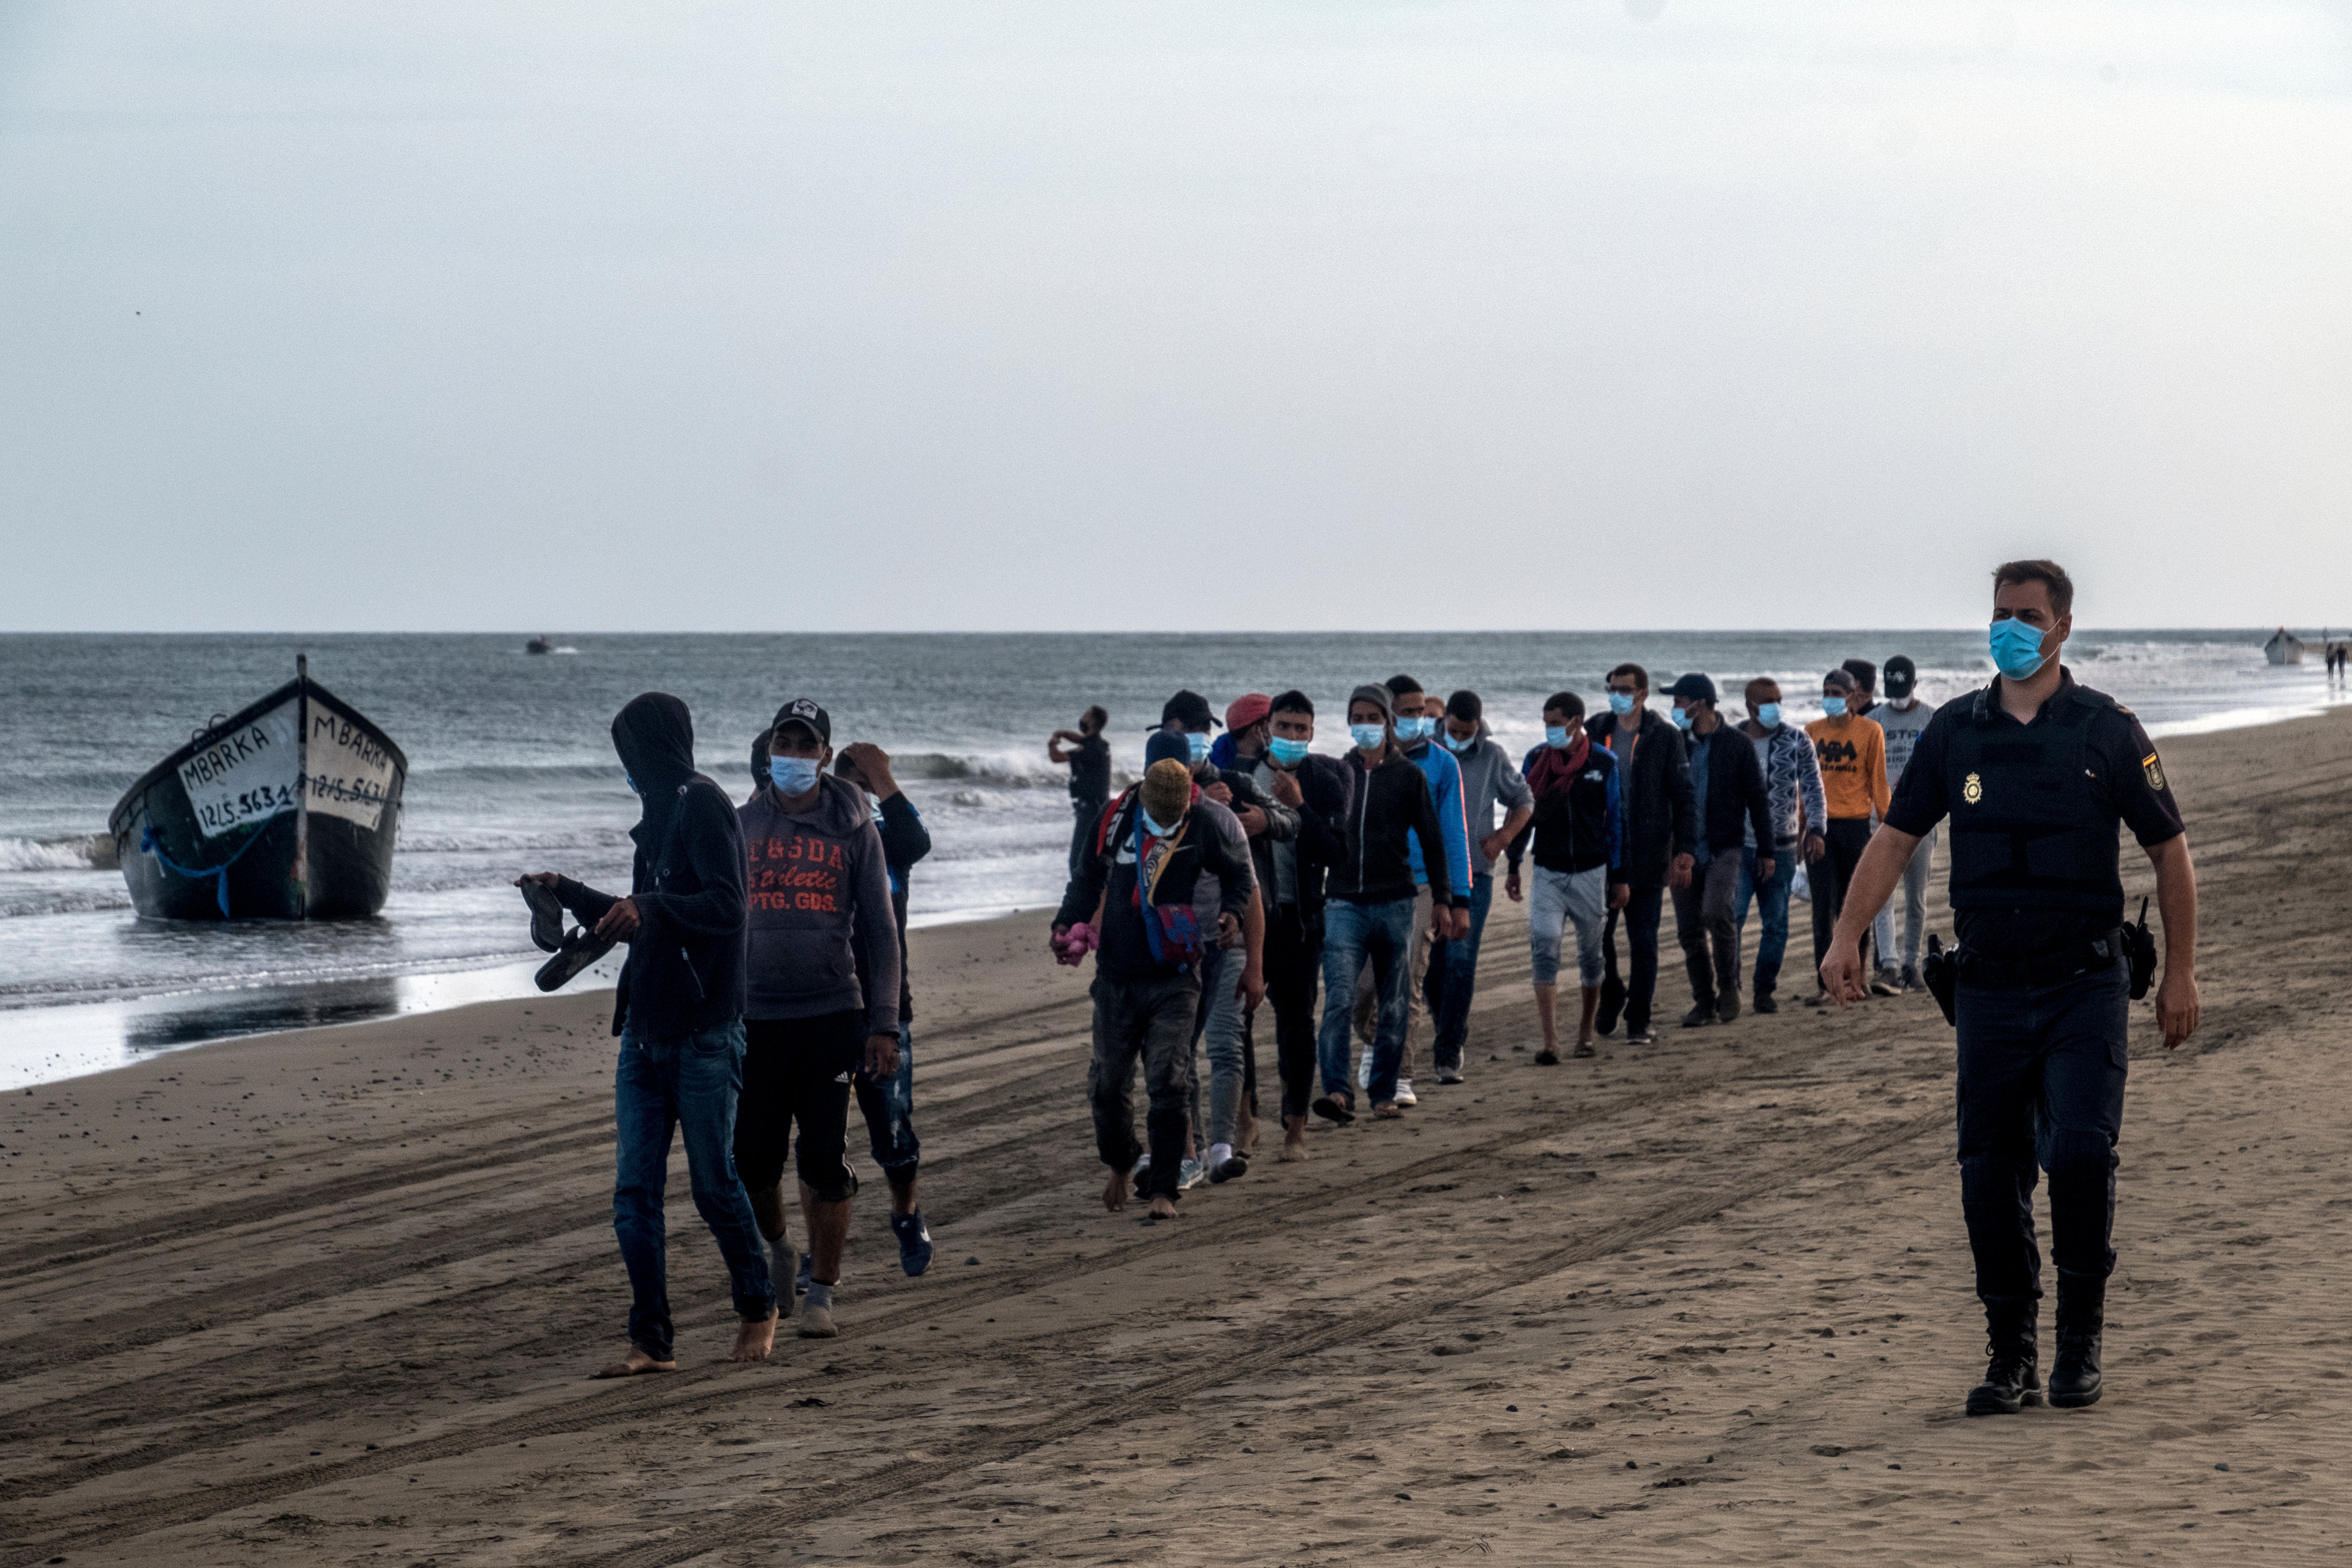 Migrants from Morocco walk along the shore escorted by Spanish Police after arriving at the coast of the Canary Island, crossing the Atlantic Ocean sailing on a wooden boat on Tuesday, Oct.20, 2020. (AP Photo/Javier Bauluz)